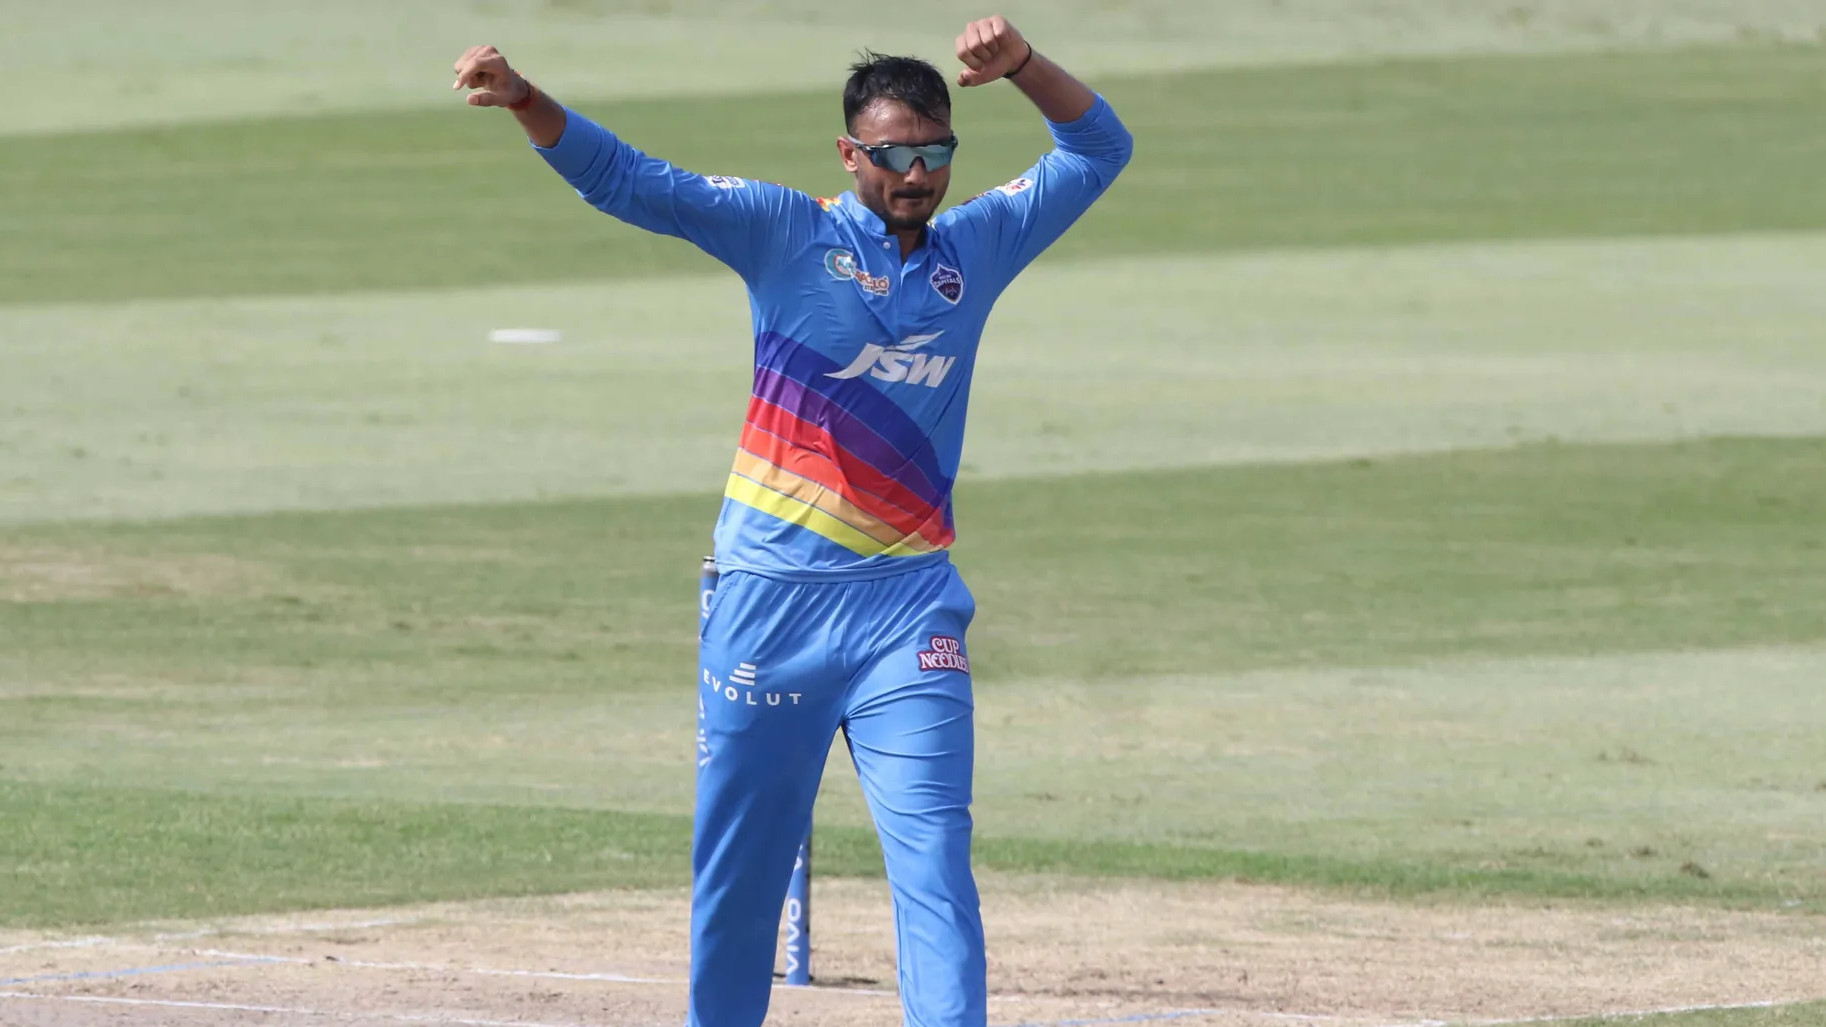 IPL 2021: Akshar Patel credits his ability of 'reading the batter's mind' behind his IPL success